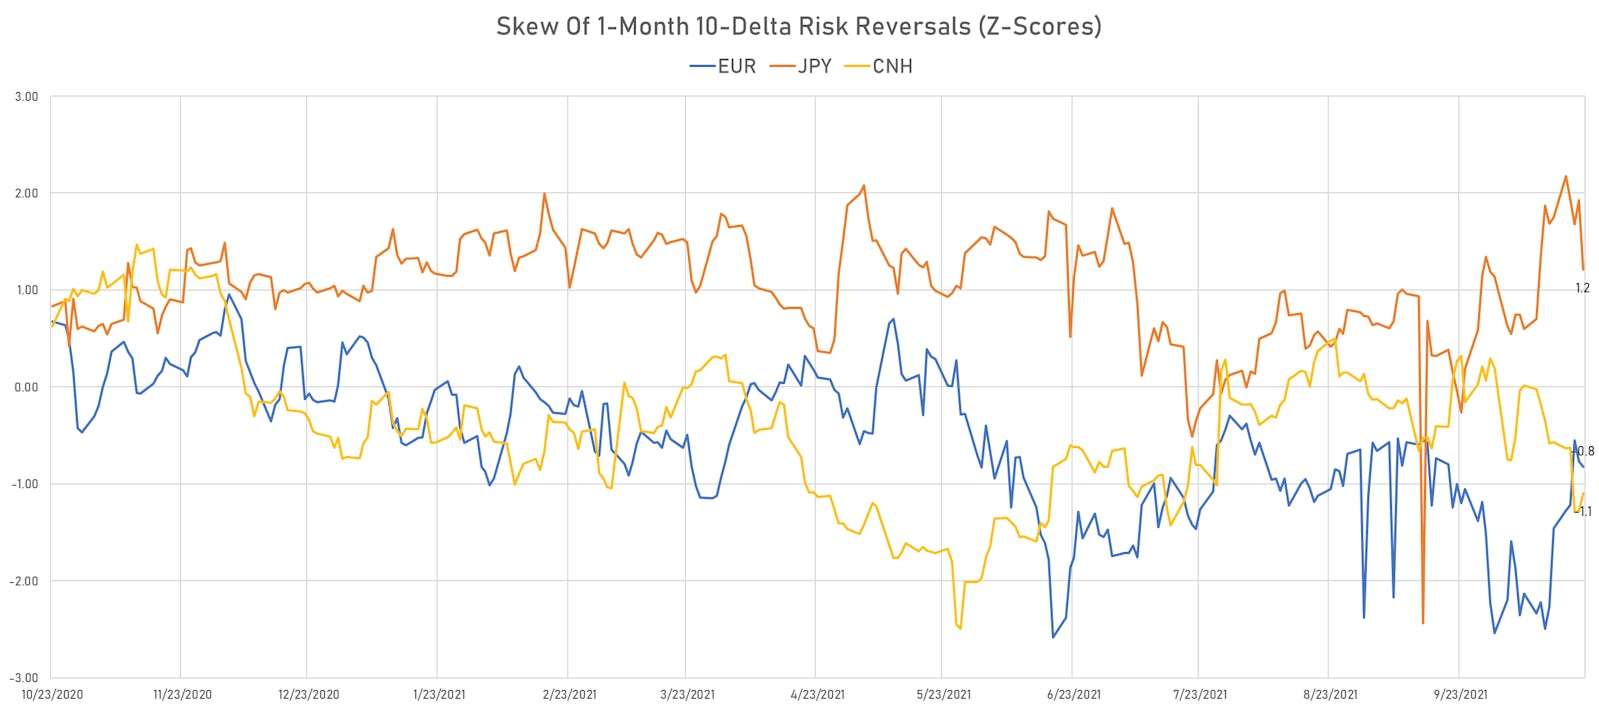 Gains in the CNH Reflected In The Implied Volatility Skew Of Risk Reversals, While The Euro And JPY Got Closer To Home This Week | Sources: ϕpost, Refinitiv data